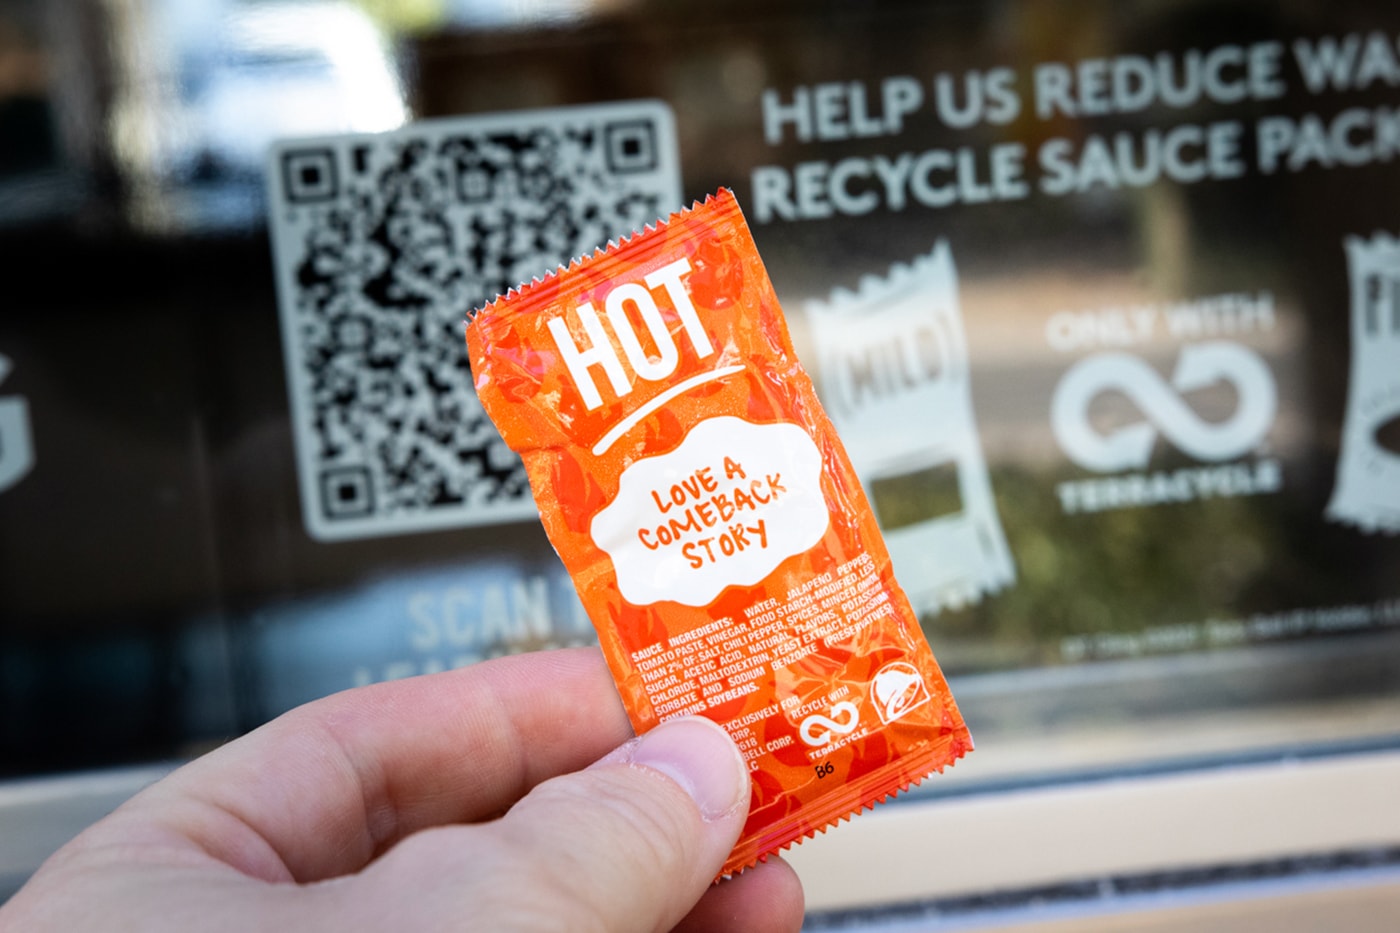 Taco Bell TerraCycle Hot Sauce Packets Recycling Partnership Collaboration Sustainability